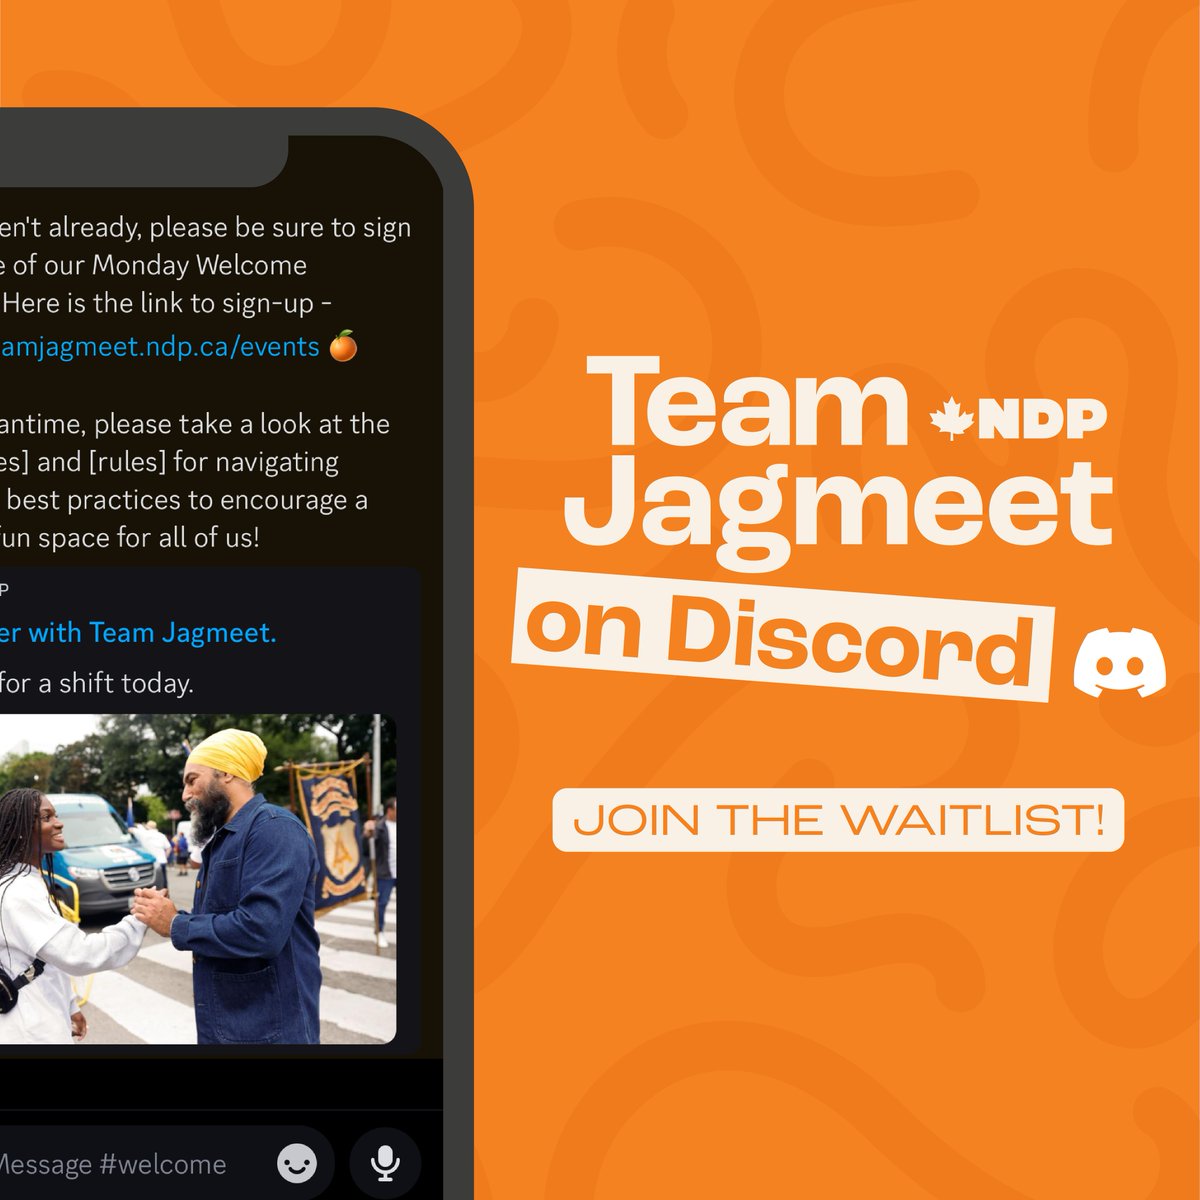 2 days till we’re live on Discord!! Have you signed up? Can't wait to see you there!  ndp.ca/join-teamjagme…